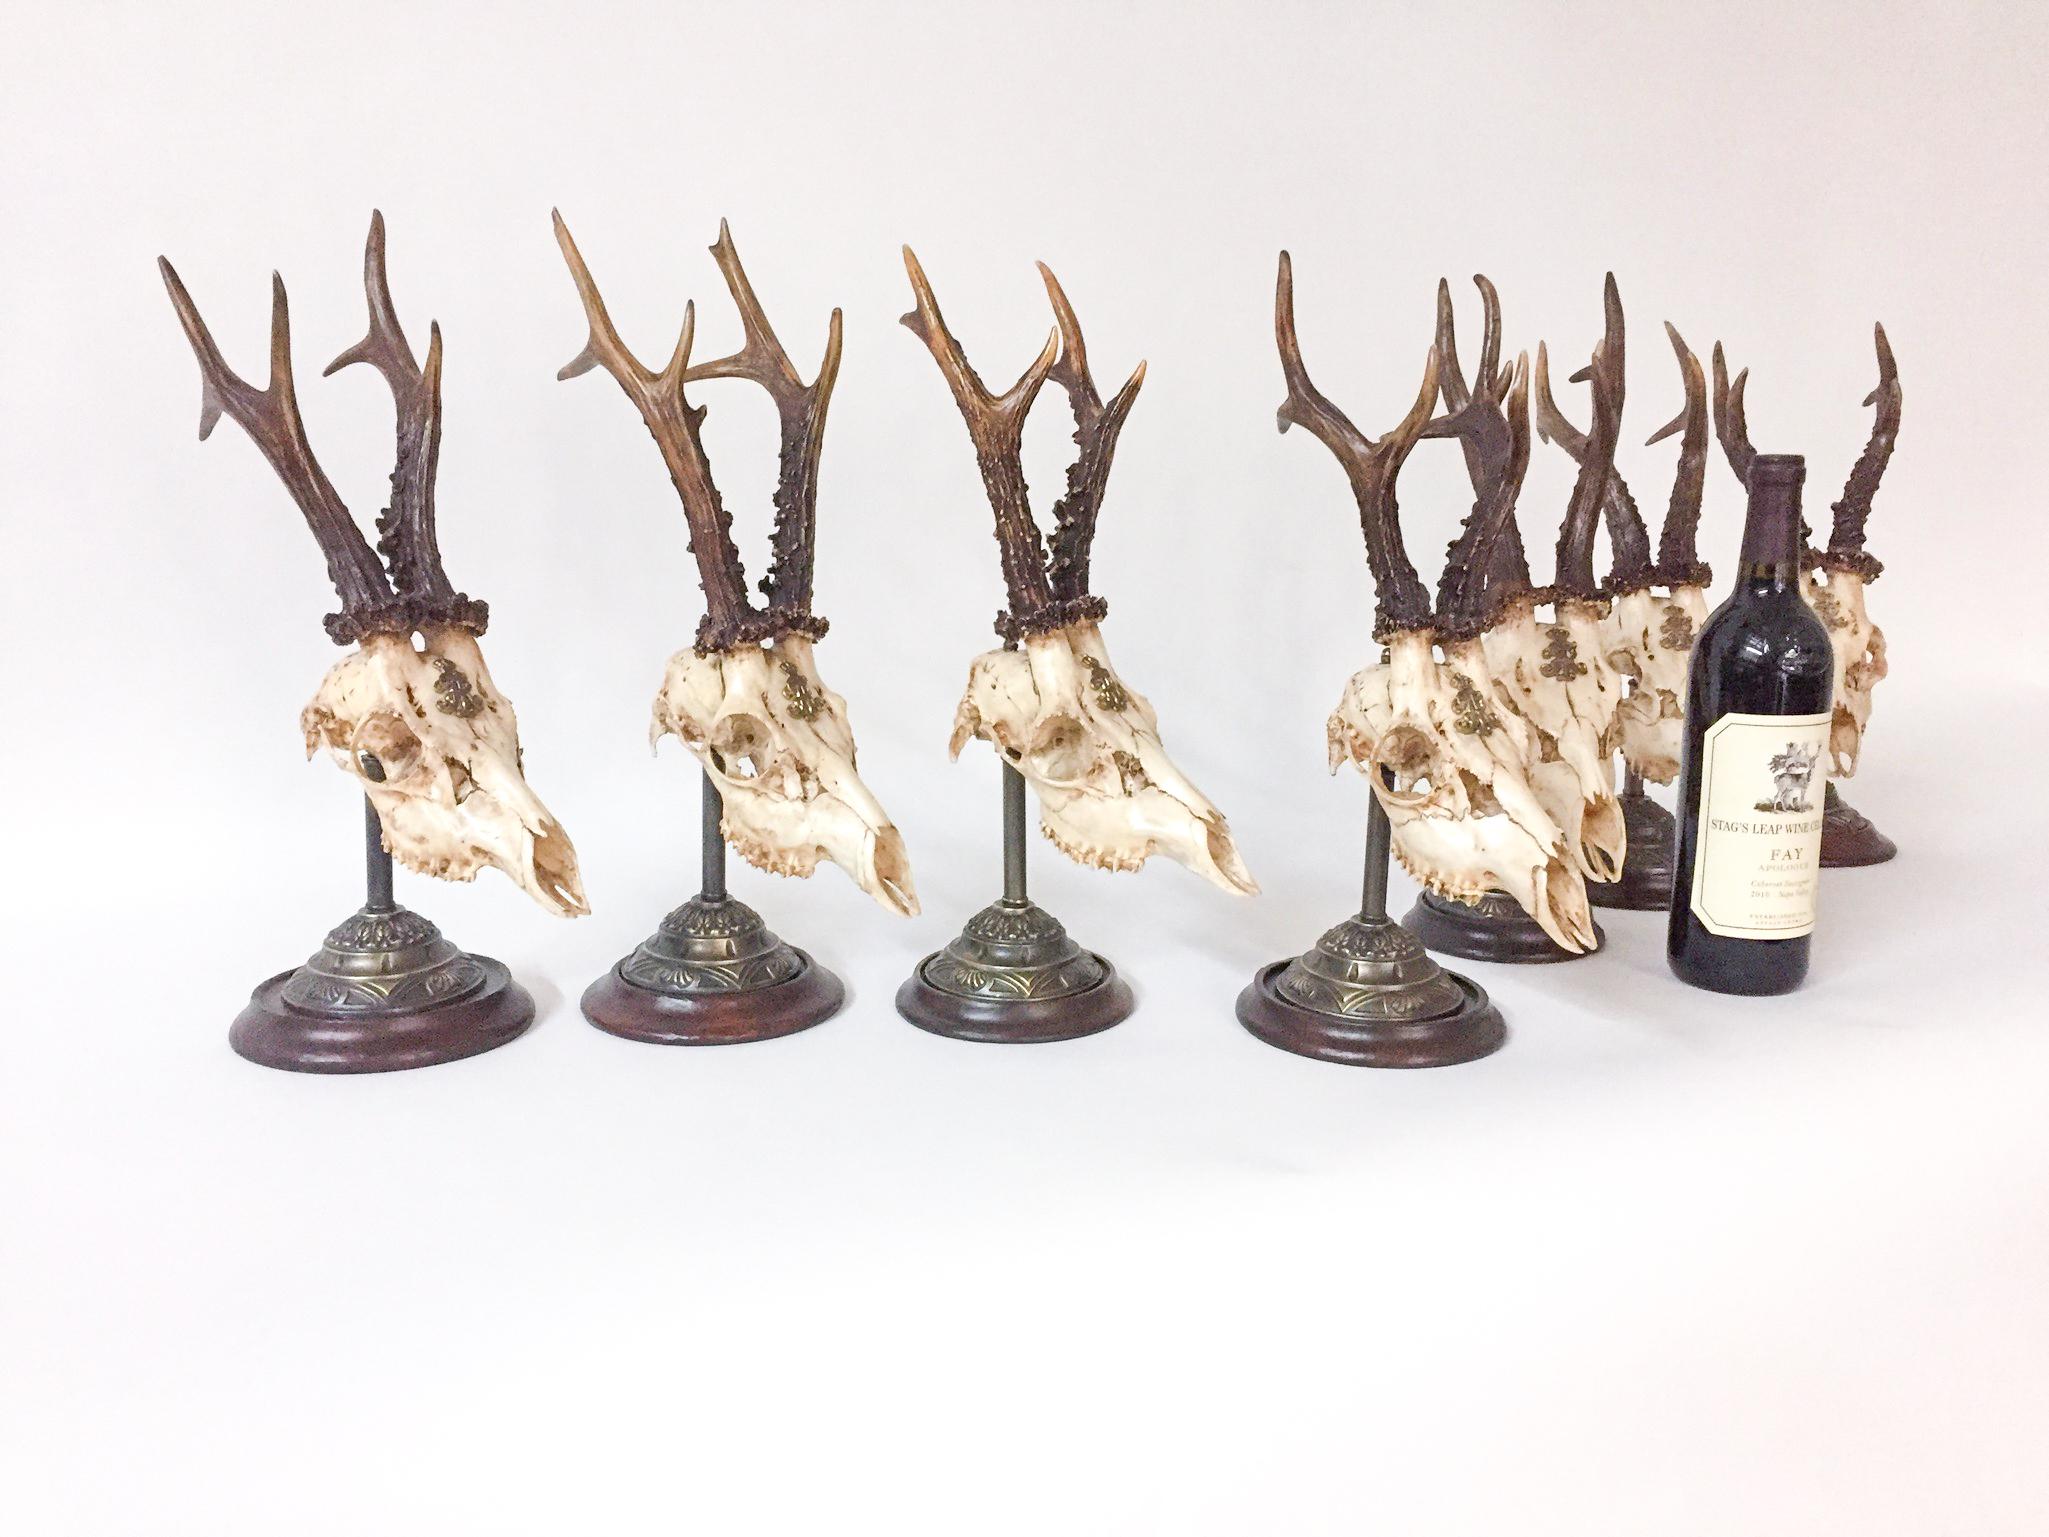 19th century Habsburg roe deer trophies on stands with the royal cypher of Emperor Franz Josef of Austria. Each of the seven available trophies is mounted on a bronze and wood stand with a round base. These trophies are part of a large grouping of